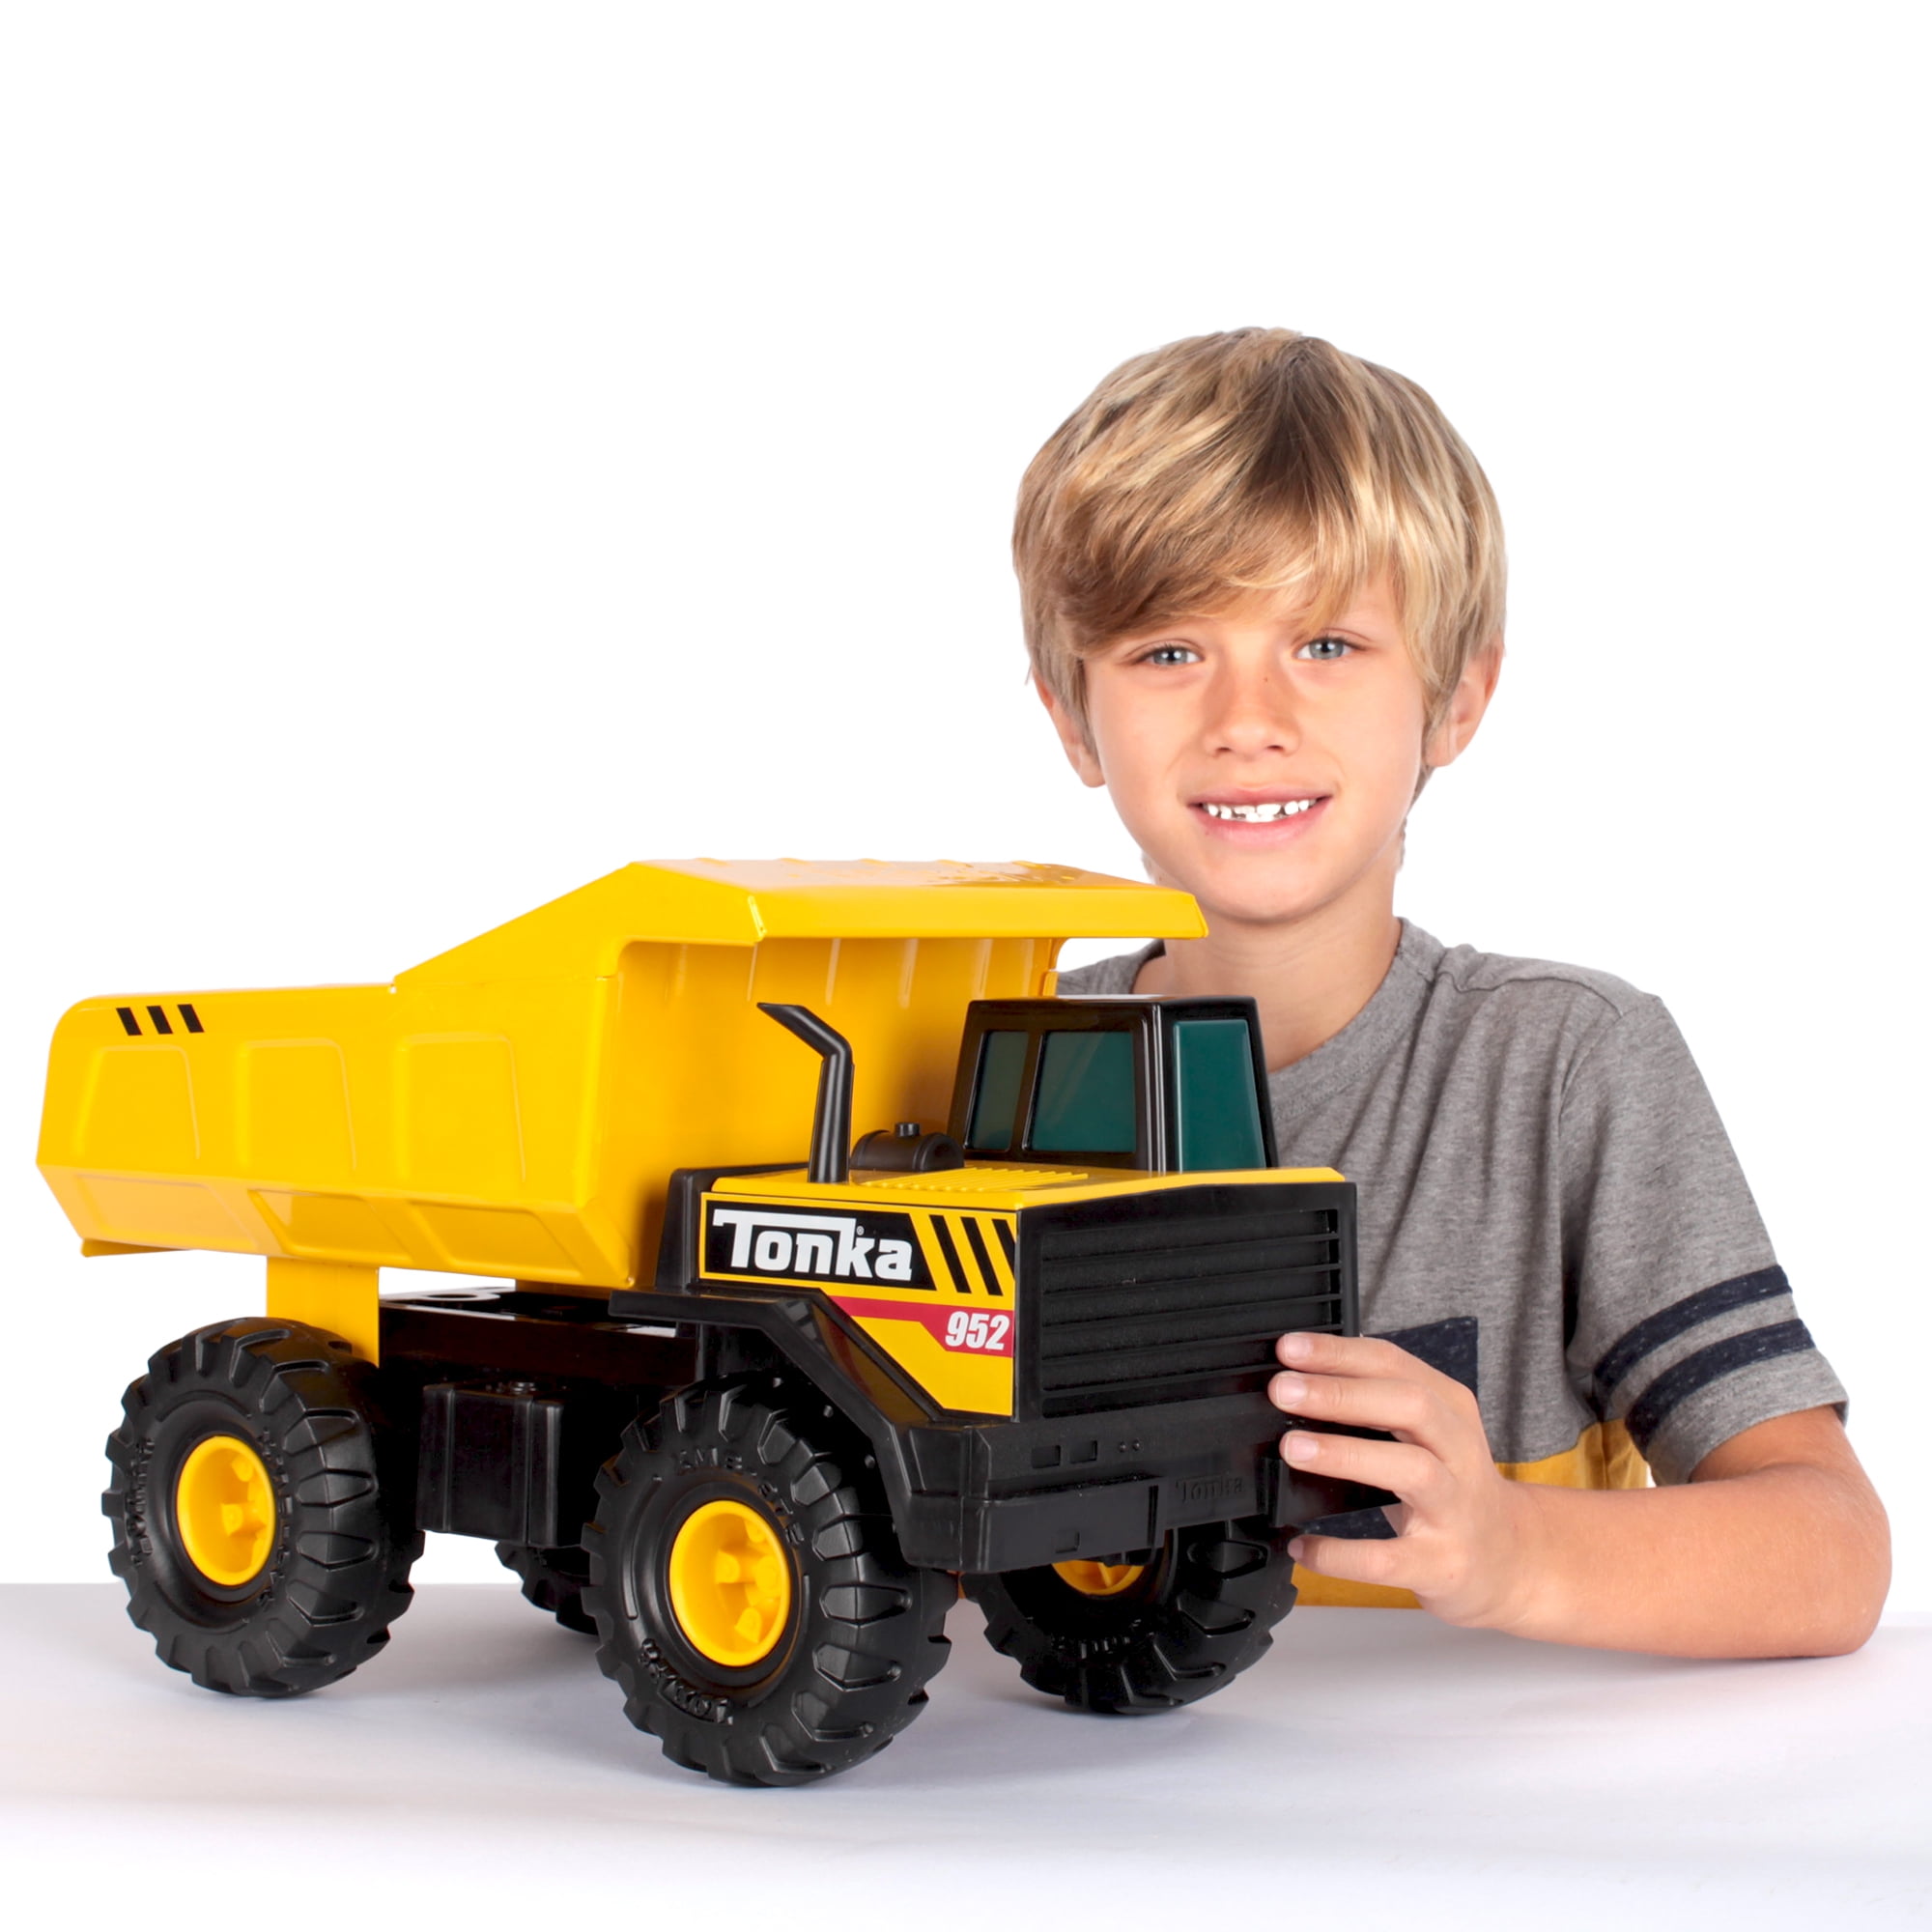 Tonka Steel Classics Mighty Dump Truck Toy 06025 for sale online 